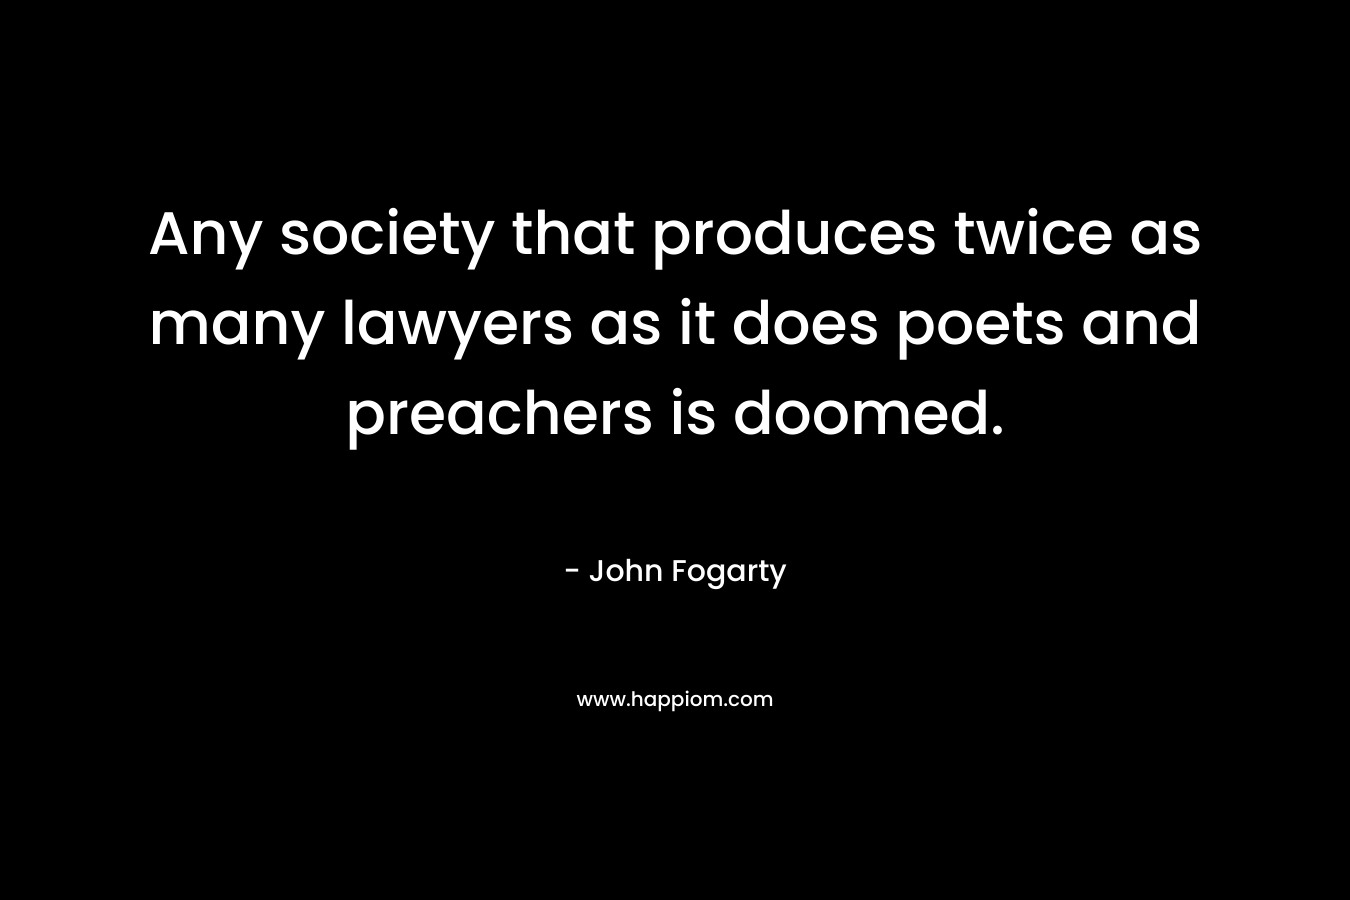 Any society that produces twice as many lawyers as it does poets and preachers is doomed.